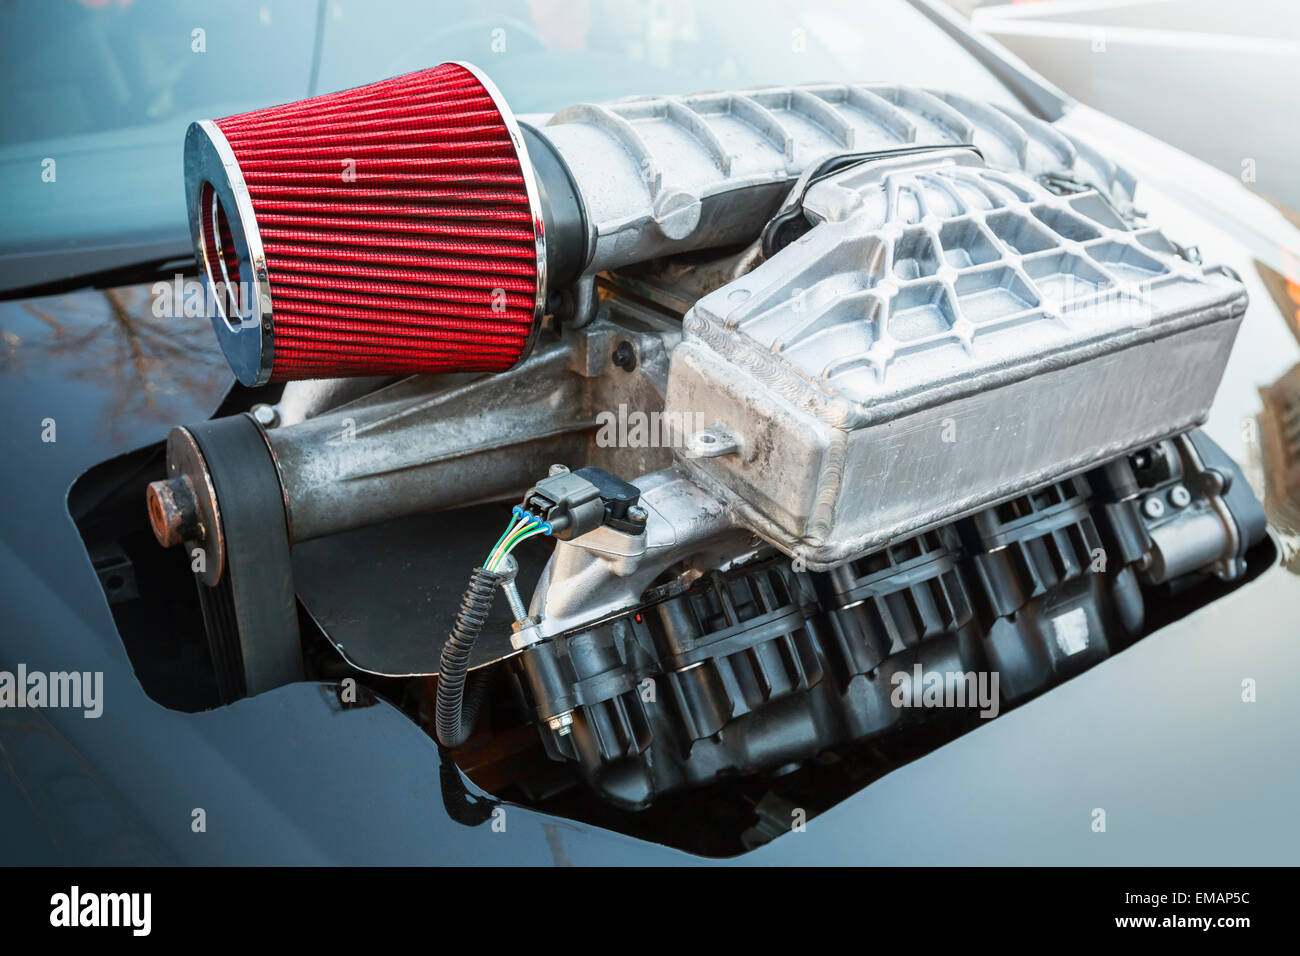 Supercharger, air compressor that increases the pressure or density of air supplied to an internal combustion car engine, closeu Stock Photo